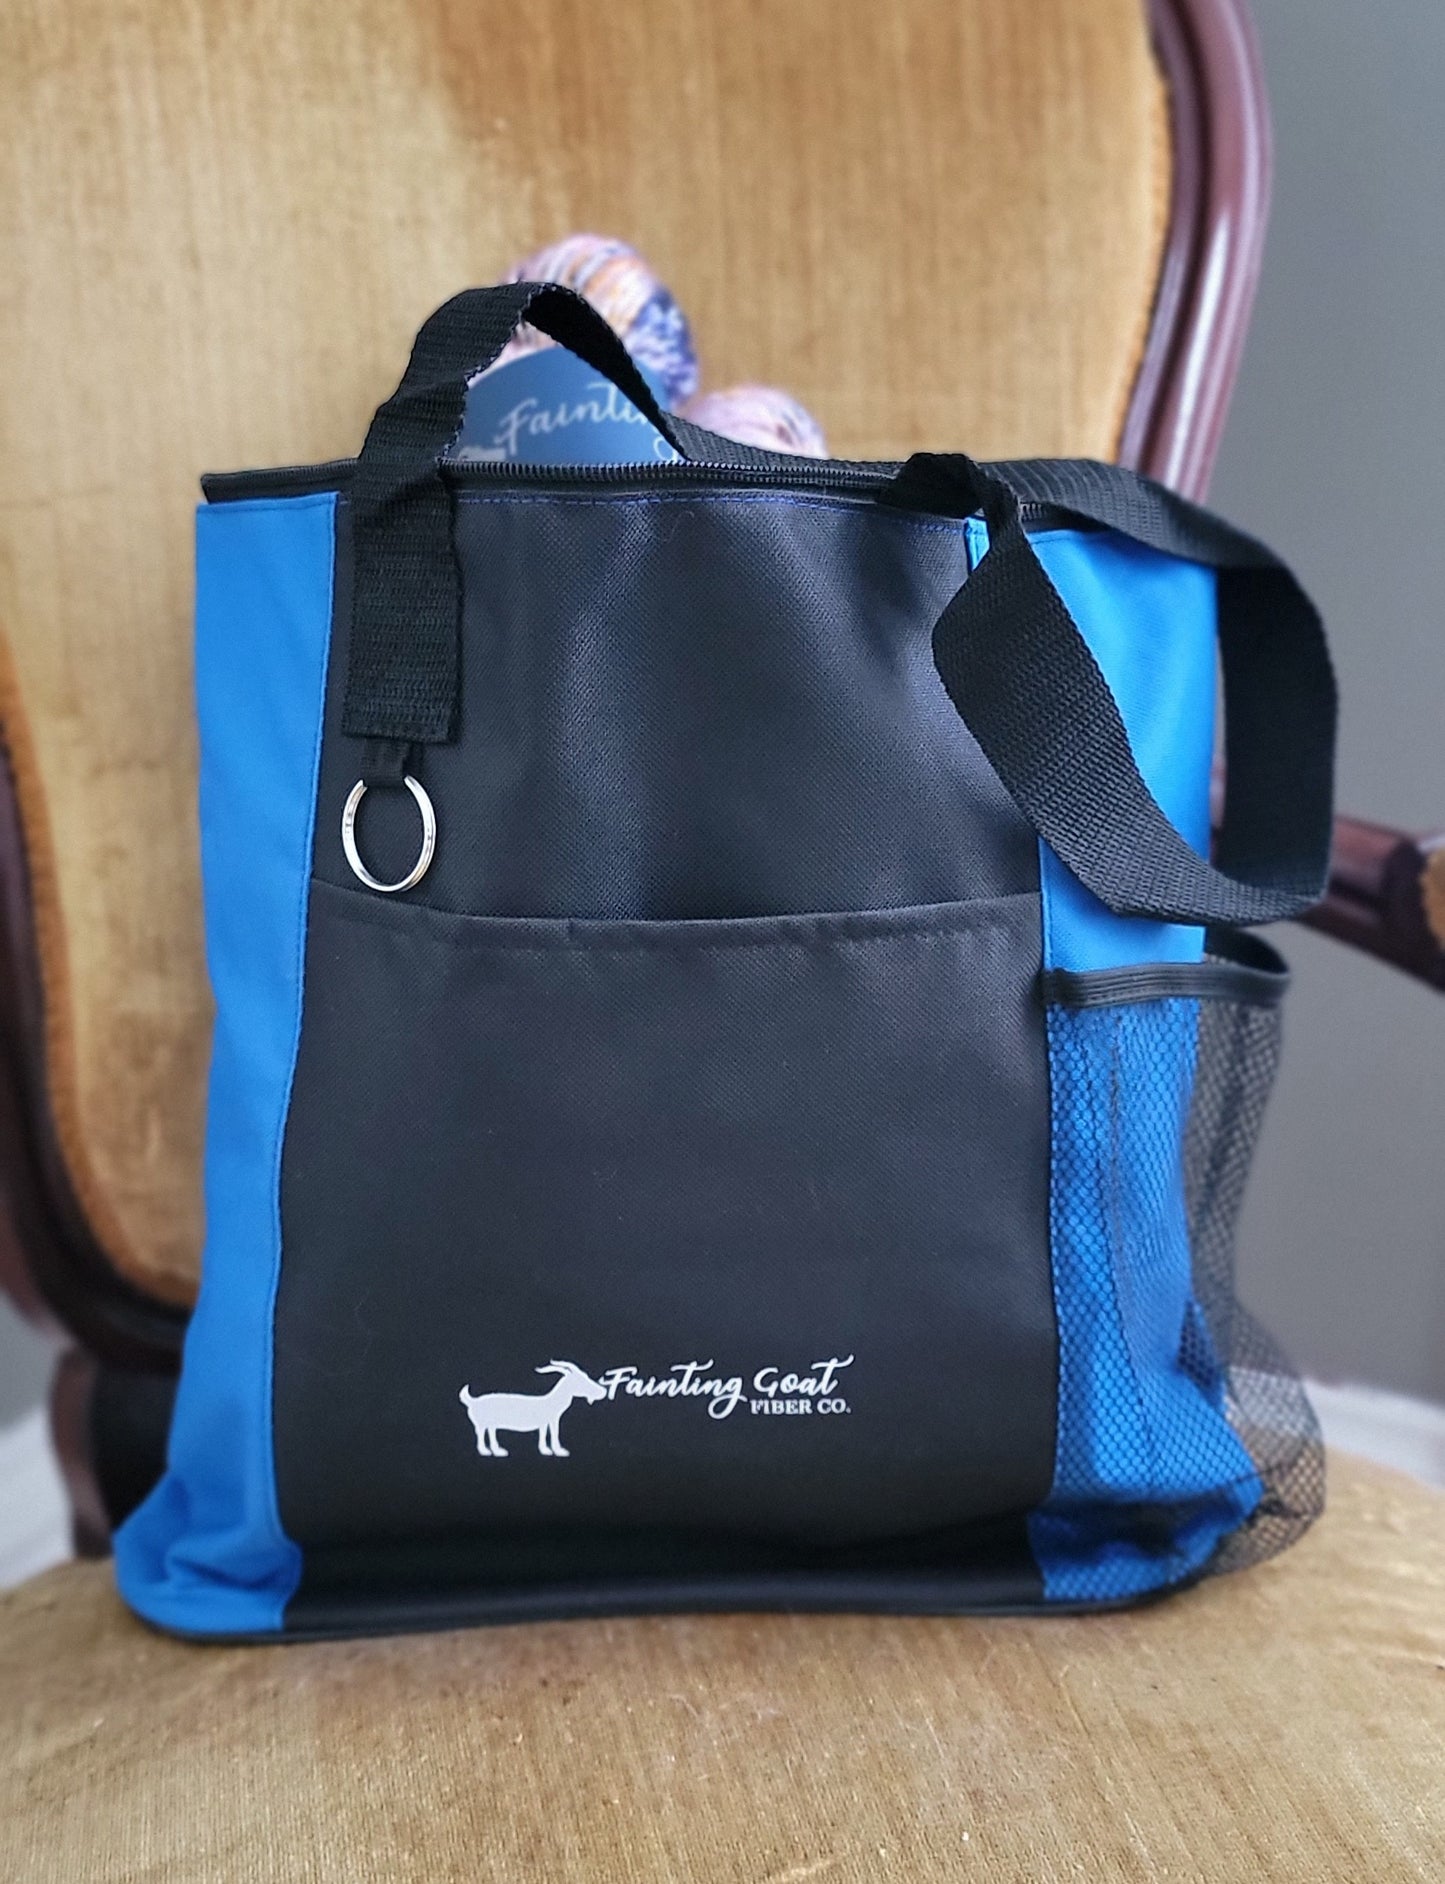 Fainting Goat Tote Bag Blue w/Black / Ready to Ship